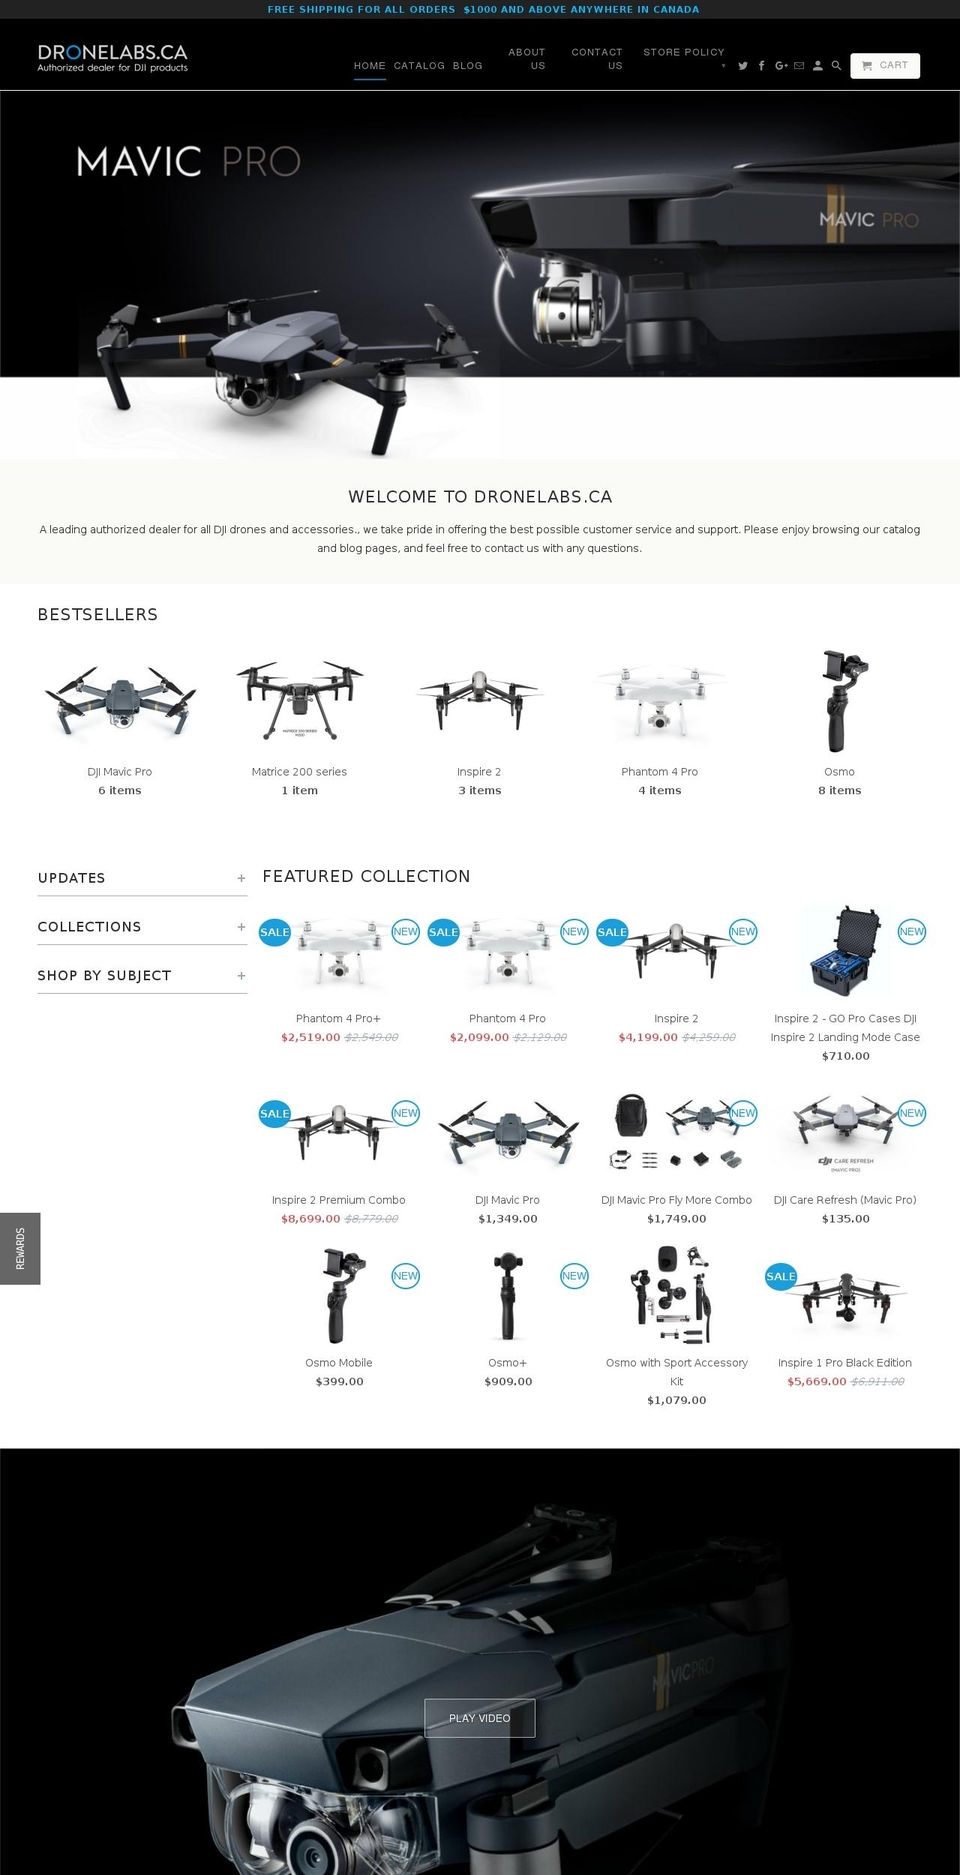 Focal Shopify theme site example dronelabs.ca